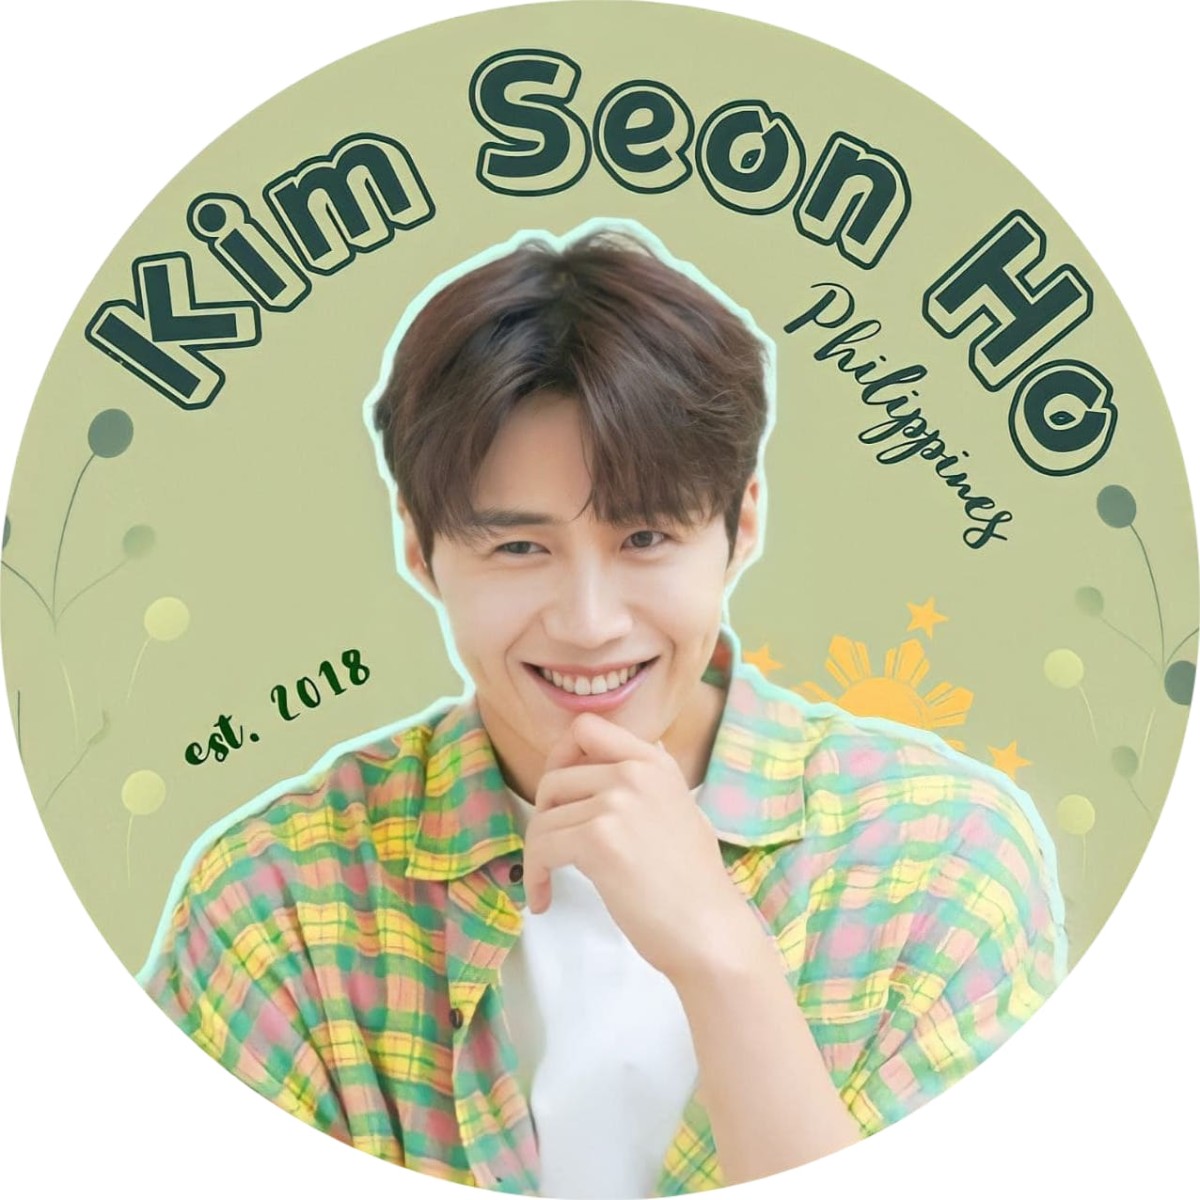 <h1>Kim Seon Ho Philippines</h1>
<p>Kim Seon Ho Philippines is the first fanbase in the country created for the actor, Kim Seon Ho. The fanbase was created in August 2018 and is currently affiliated with the Korean Artists Organization of Philippine Fan Clubs - KOPFA. Through the fundraiser created by the fanbase, a total of PHP 20,000 was given to the Kabuhayan para sa mga Kababaihan.</p>
<p style="text-align: right;"><a href="https://support.wwf.org.ph/kim-seon-ho-philippines" target="_blank" rel="noopener noreferrer">Read More &gt;</a></p>